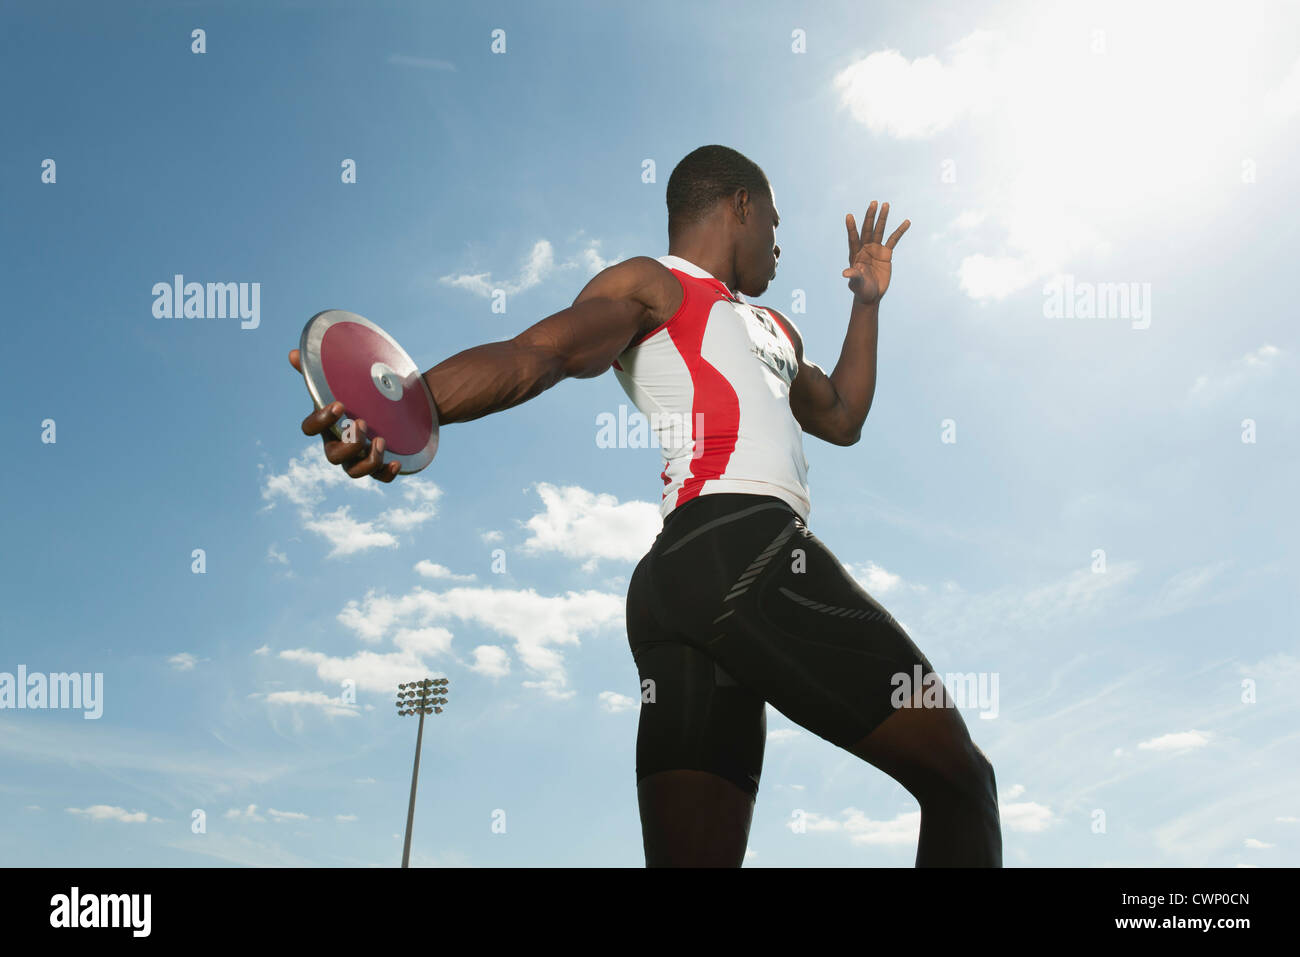 Male athlete throwing discus, low angle view Stock Photo